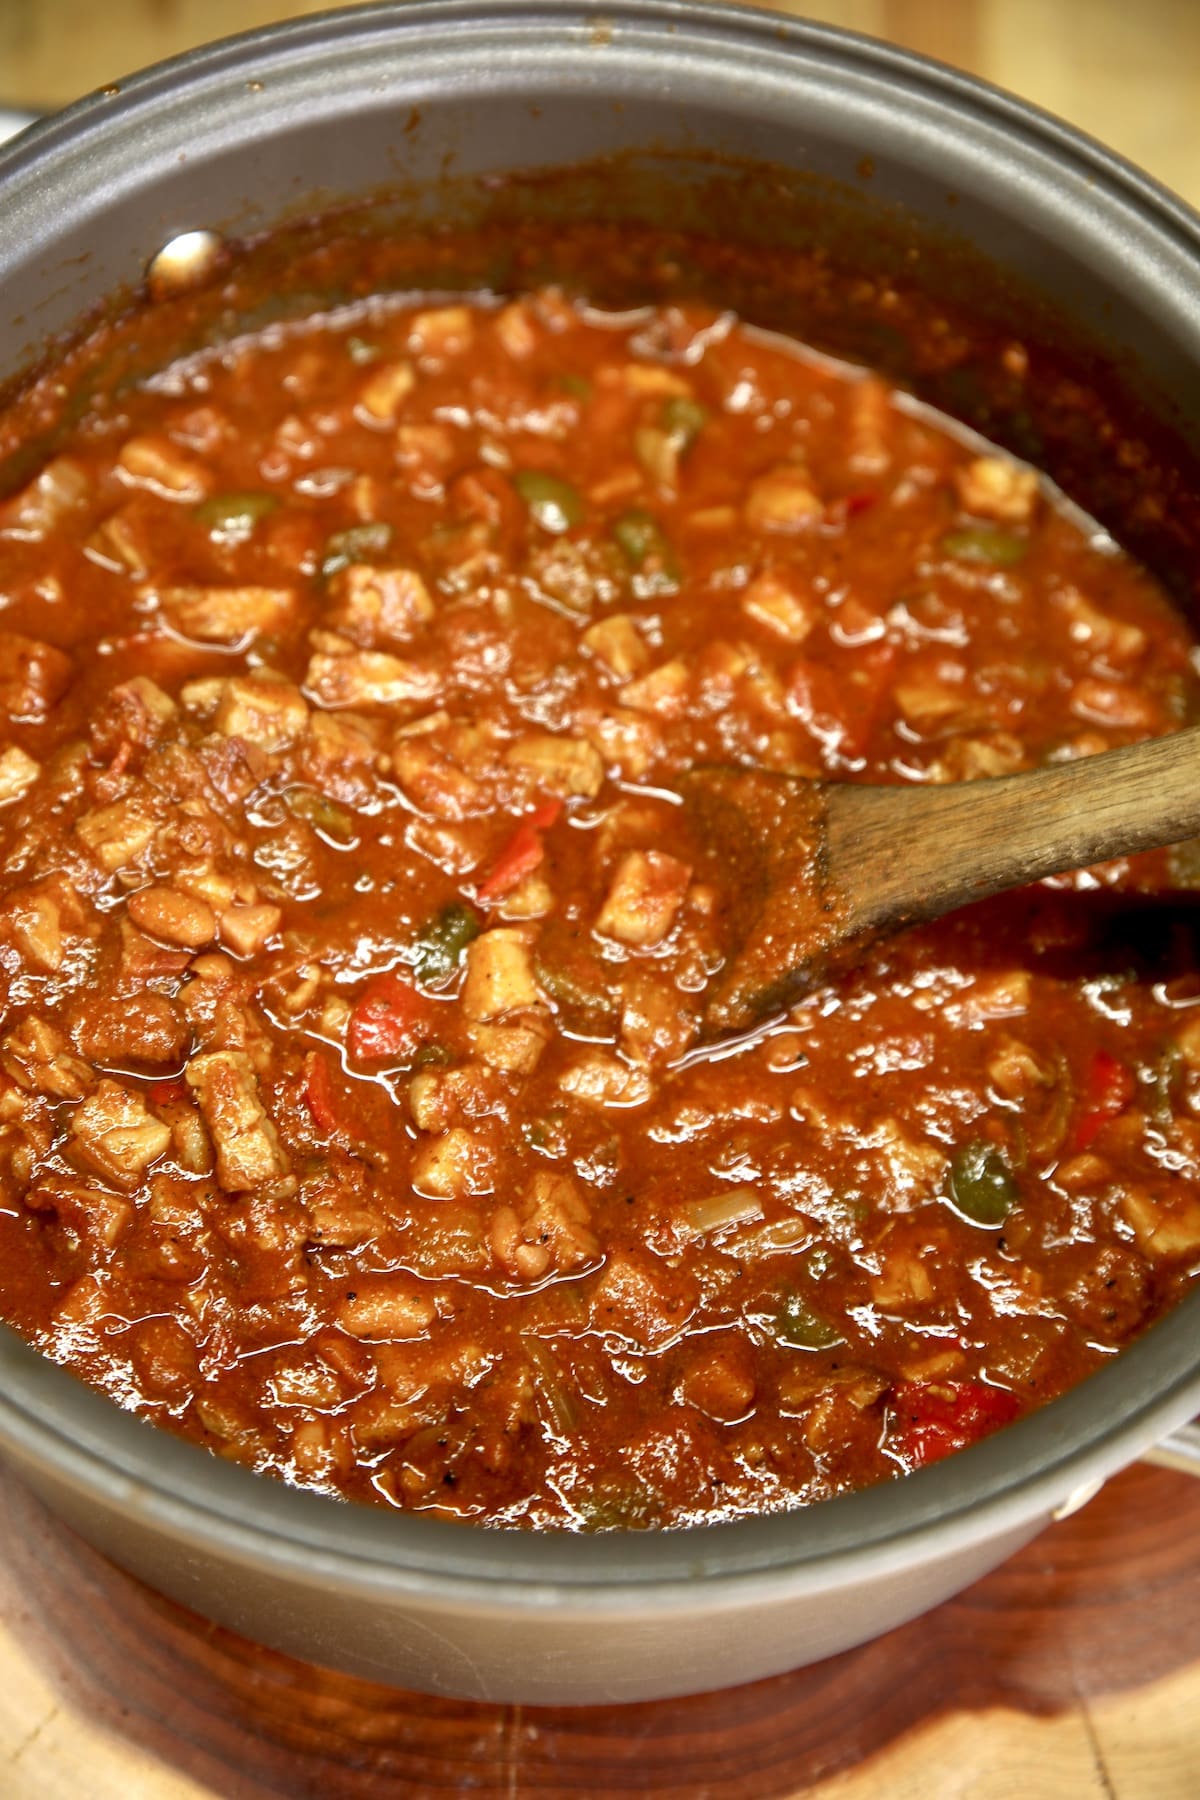 Pan of brisket chili with peppers and onions.